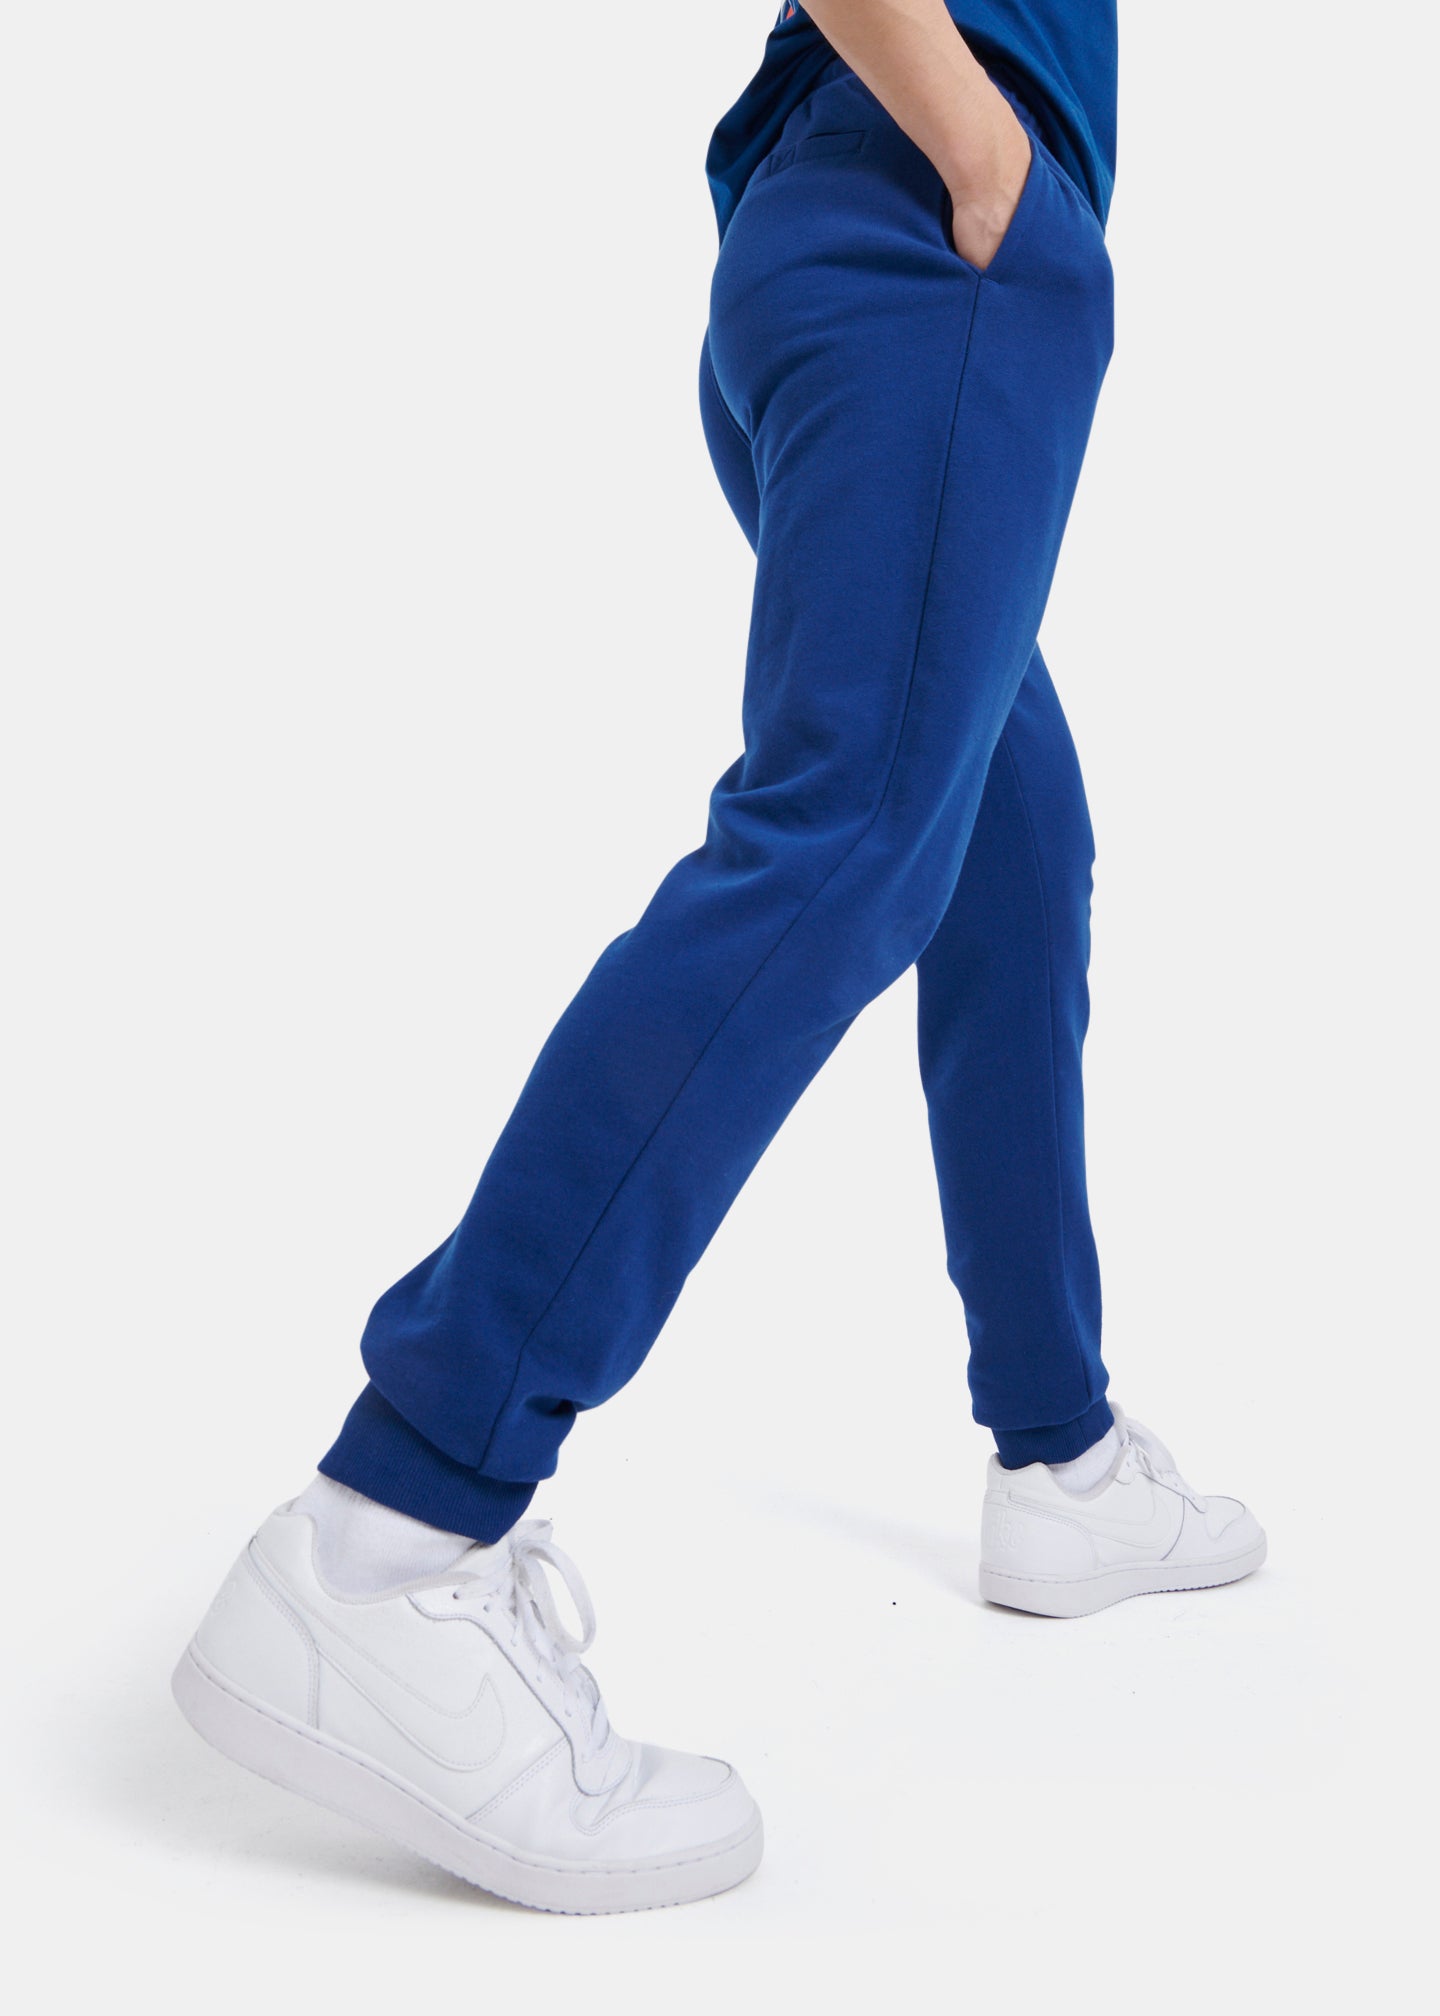 Fin Jog Pant - Navy – Nautica Competition